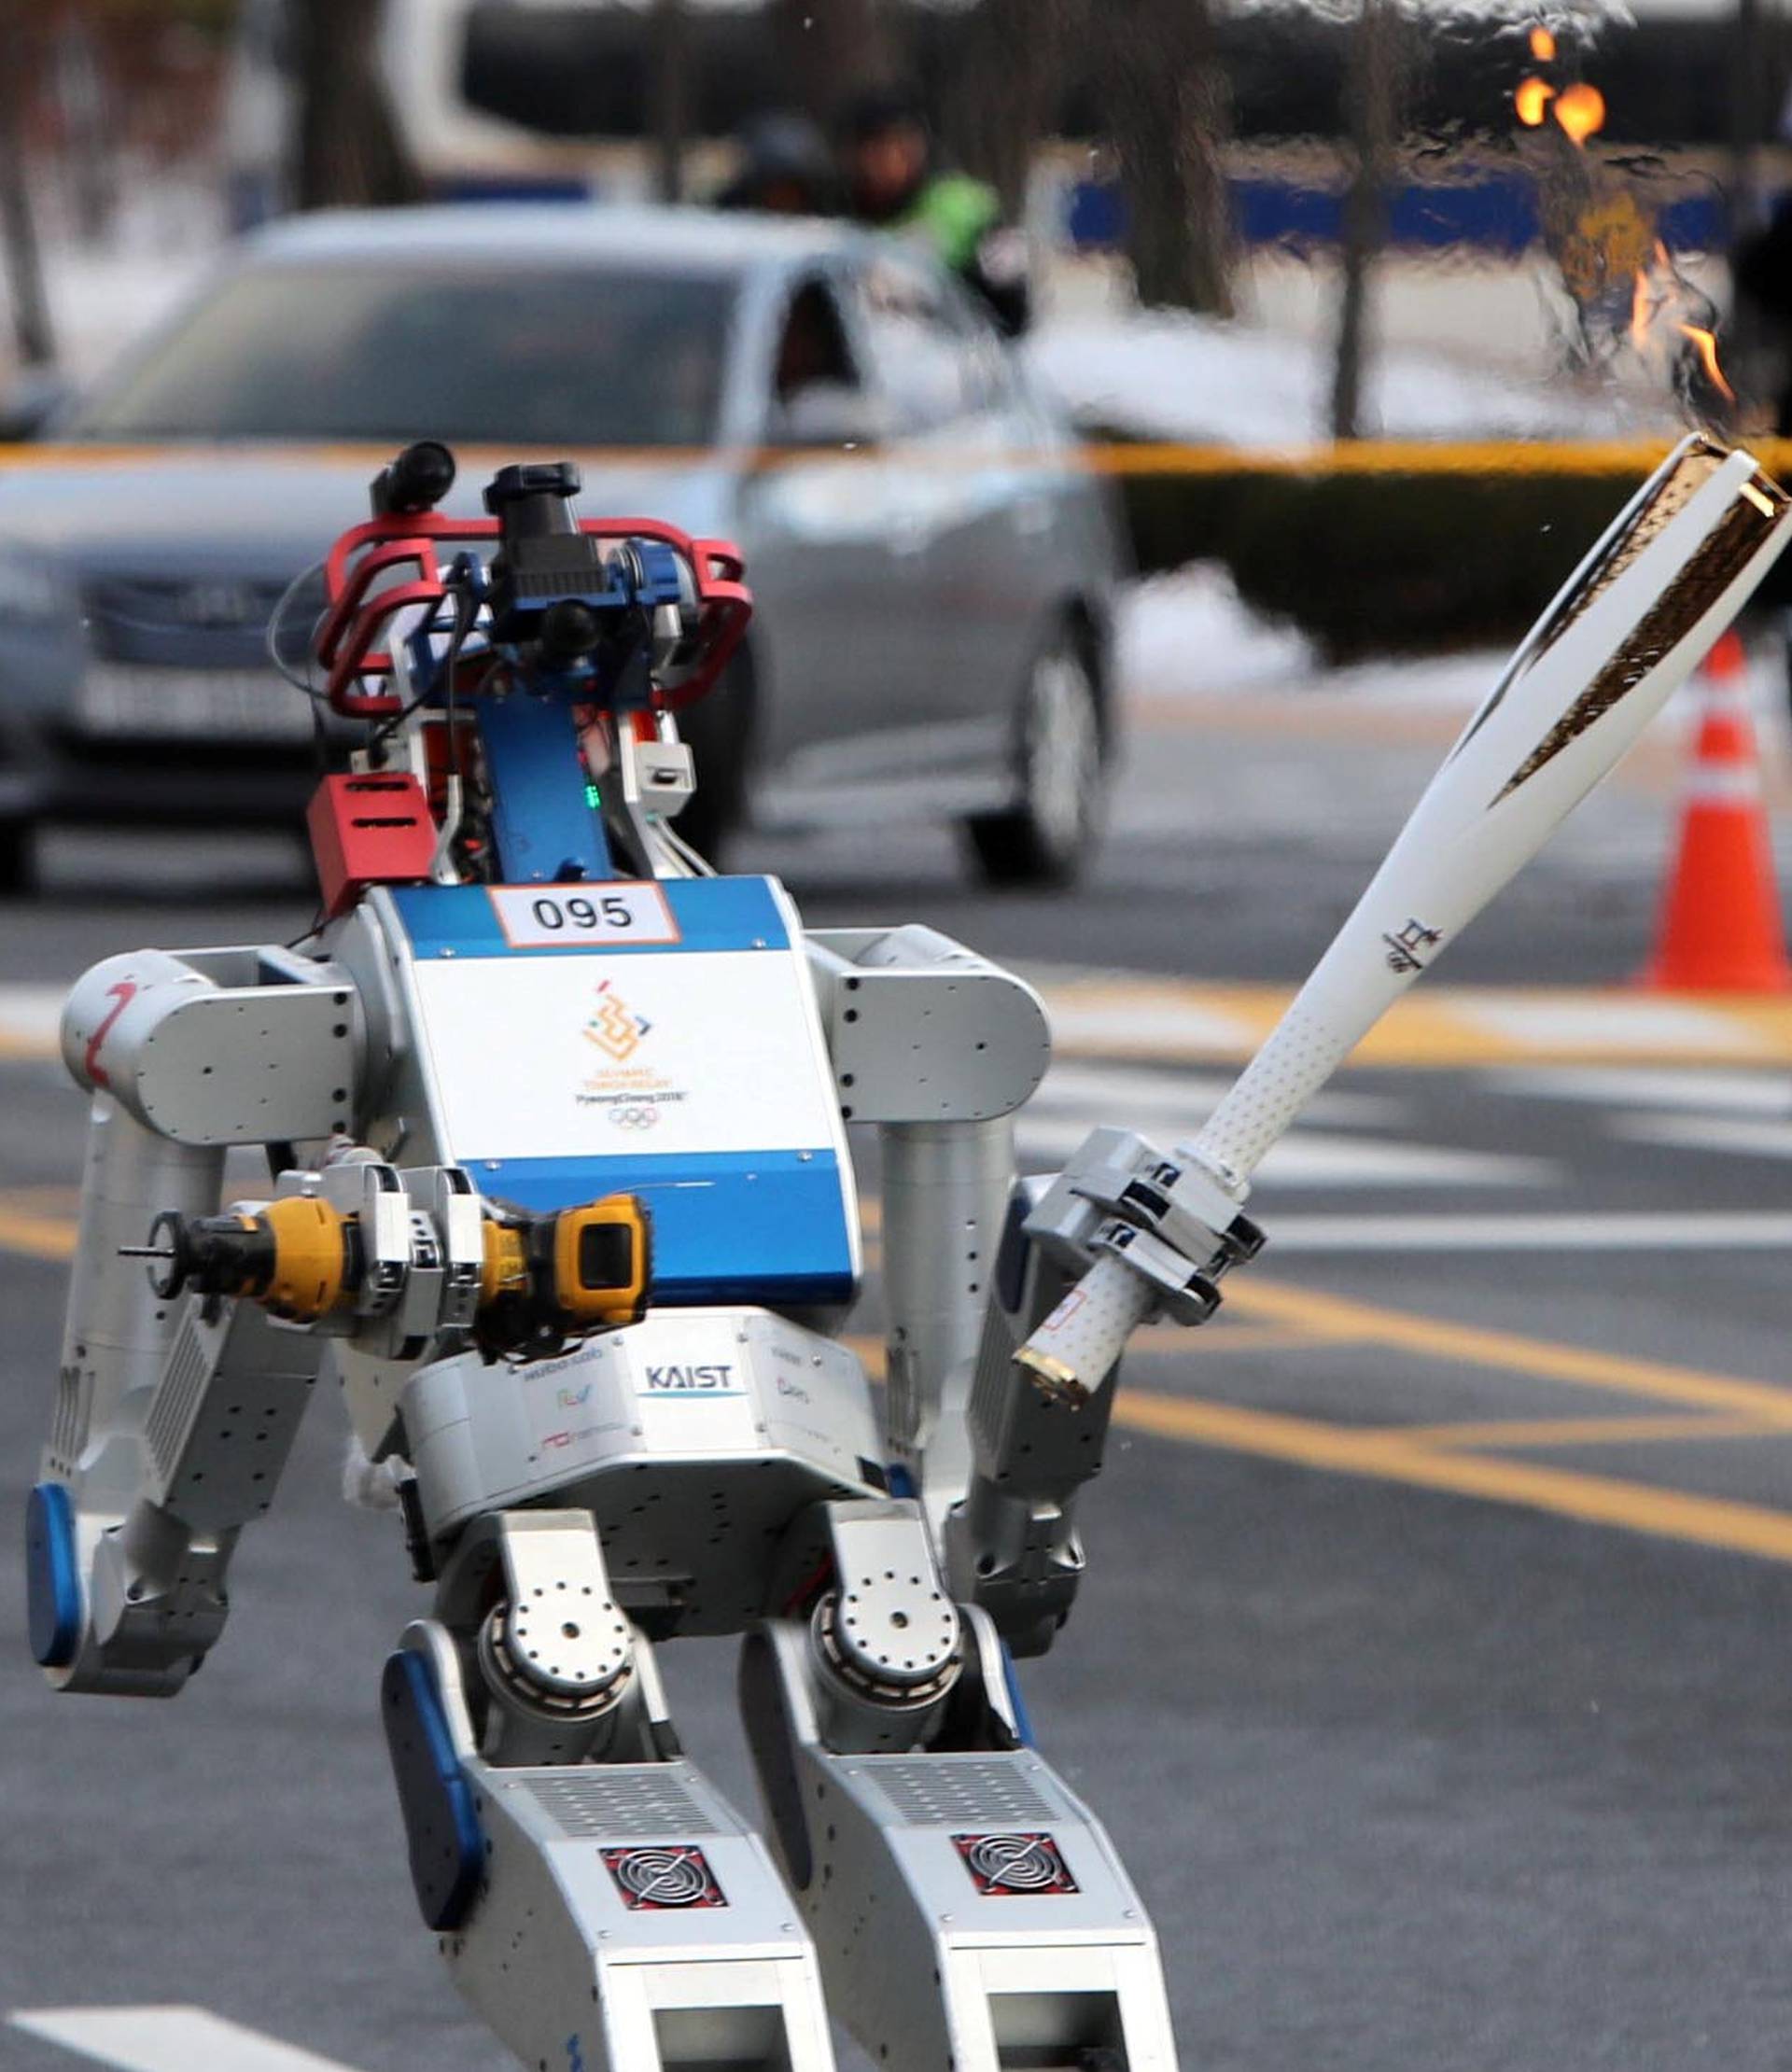 HUBO, a multifunctional walking humanoid robot, carries the Olympic torch at the Korea Advanced Institute of Science and Technology (KAIST) in Daejeon